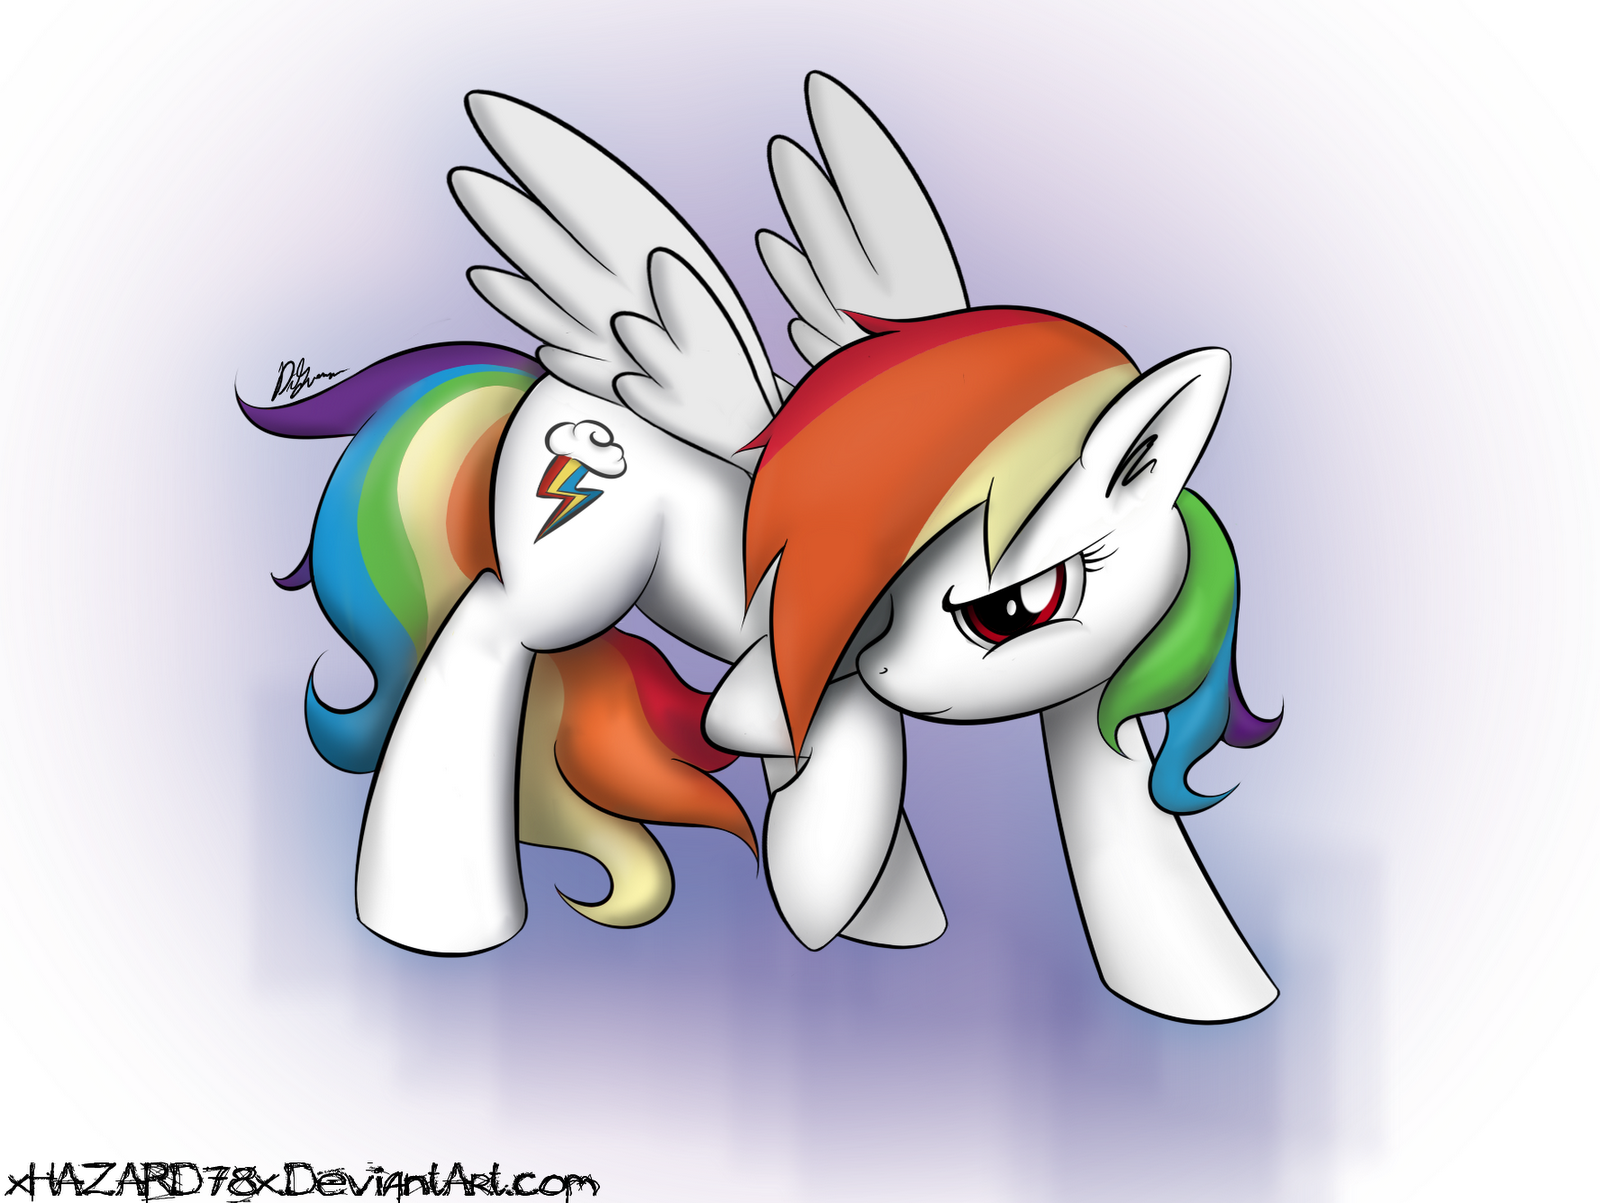 Imagespam Central - Page 19 Commission__super_rainbow_dash_transformation_by_xhazard78x-d4pbrgd